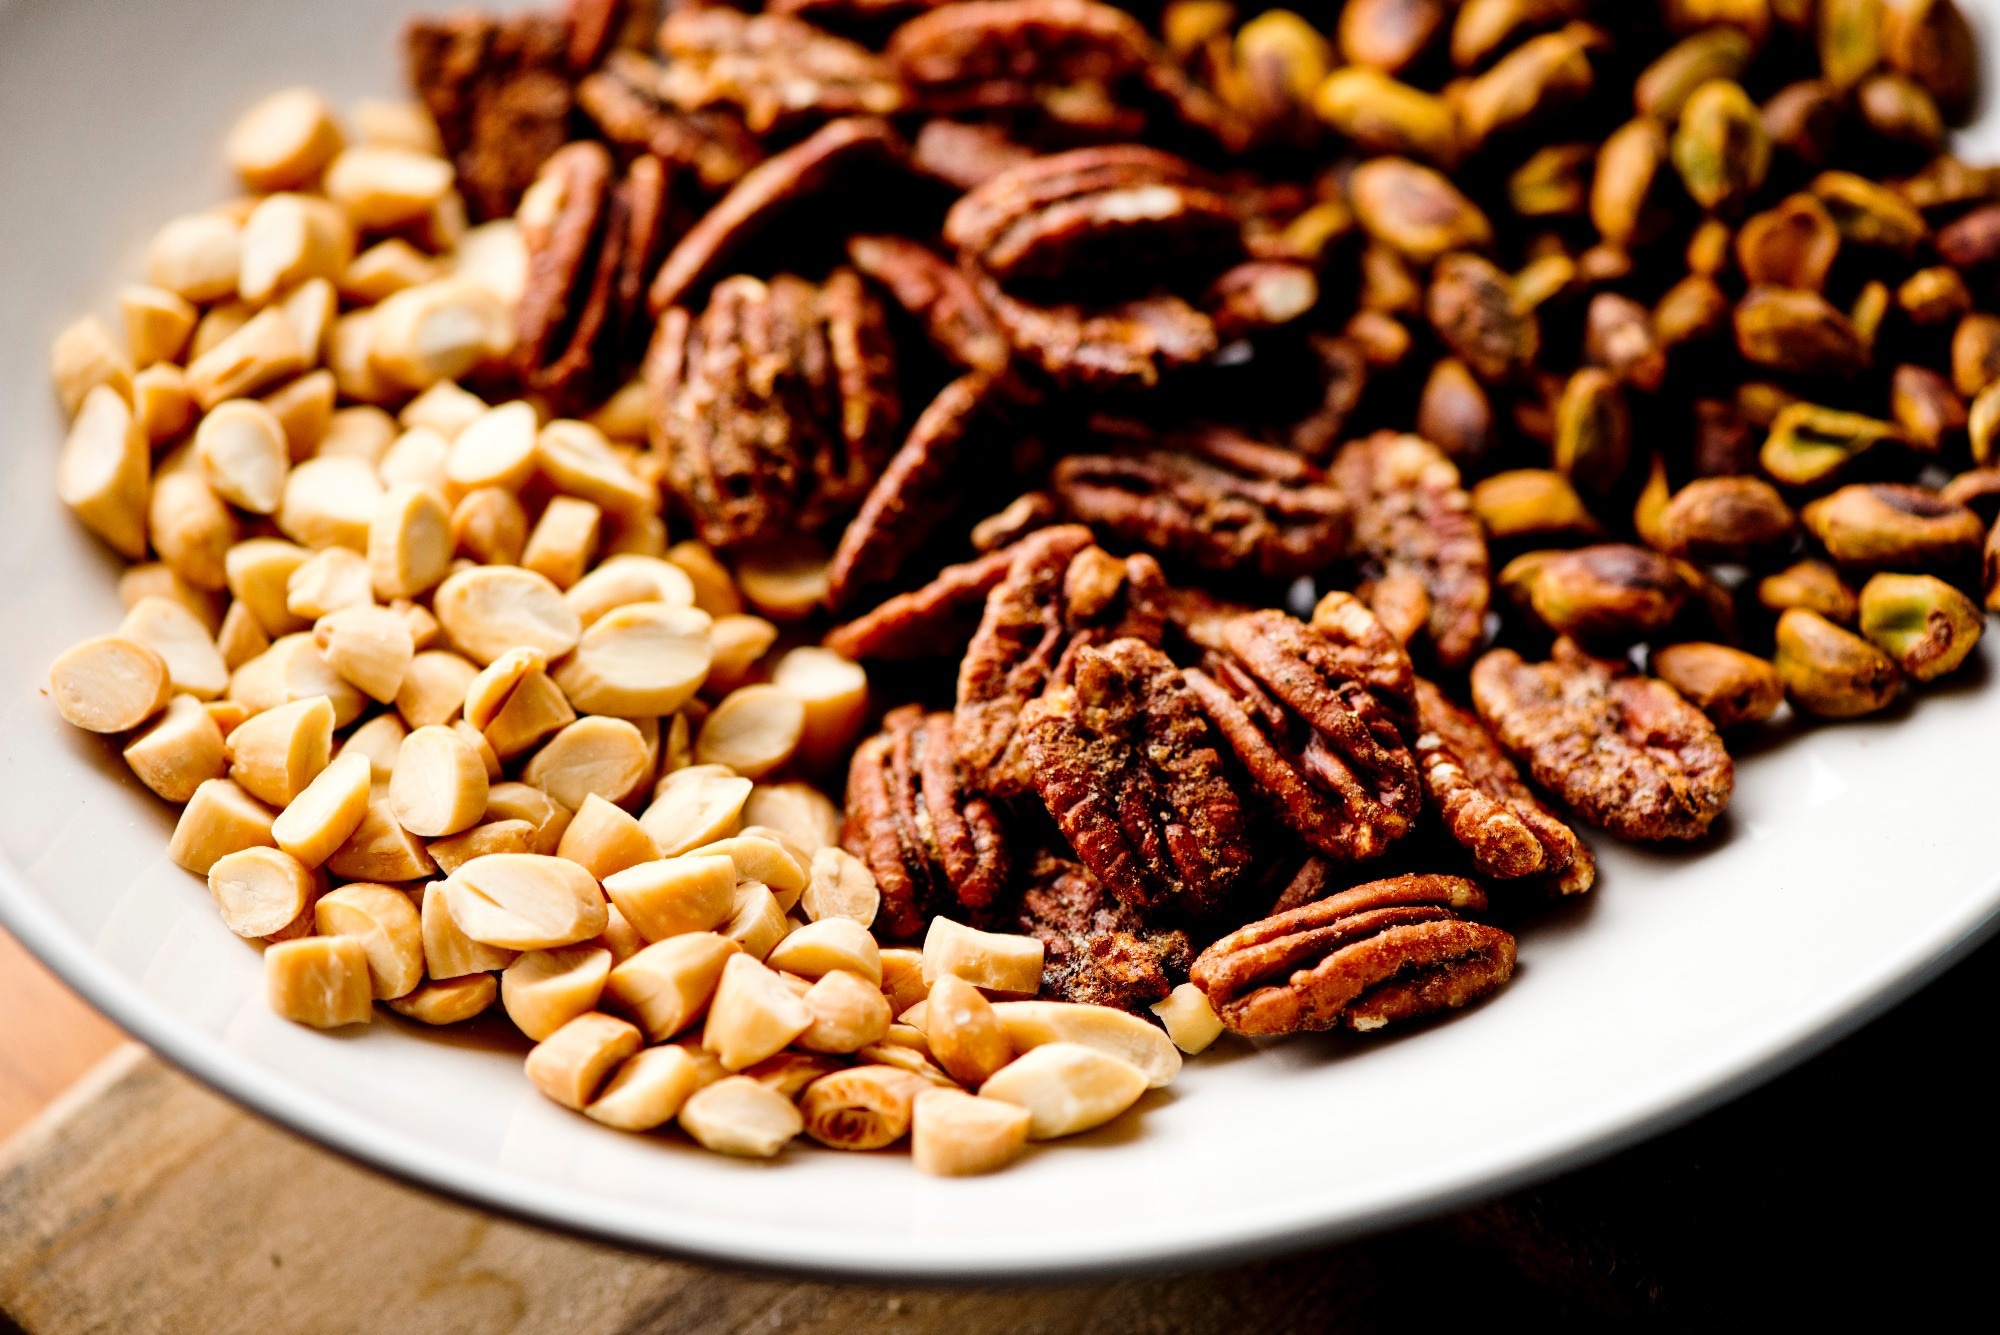 Nut consumption linked to improved male fertility, systematic review reveals